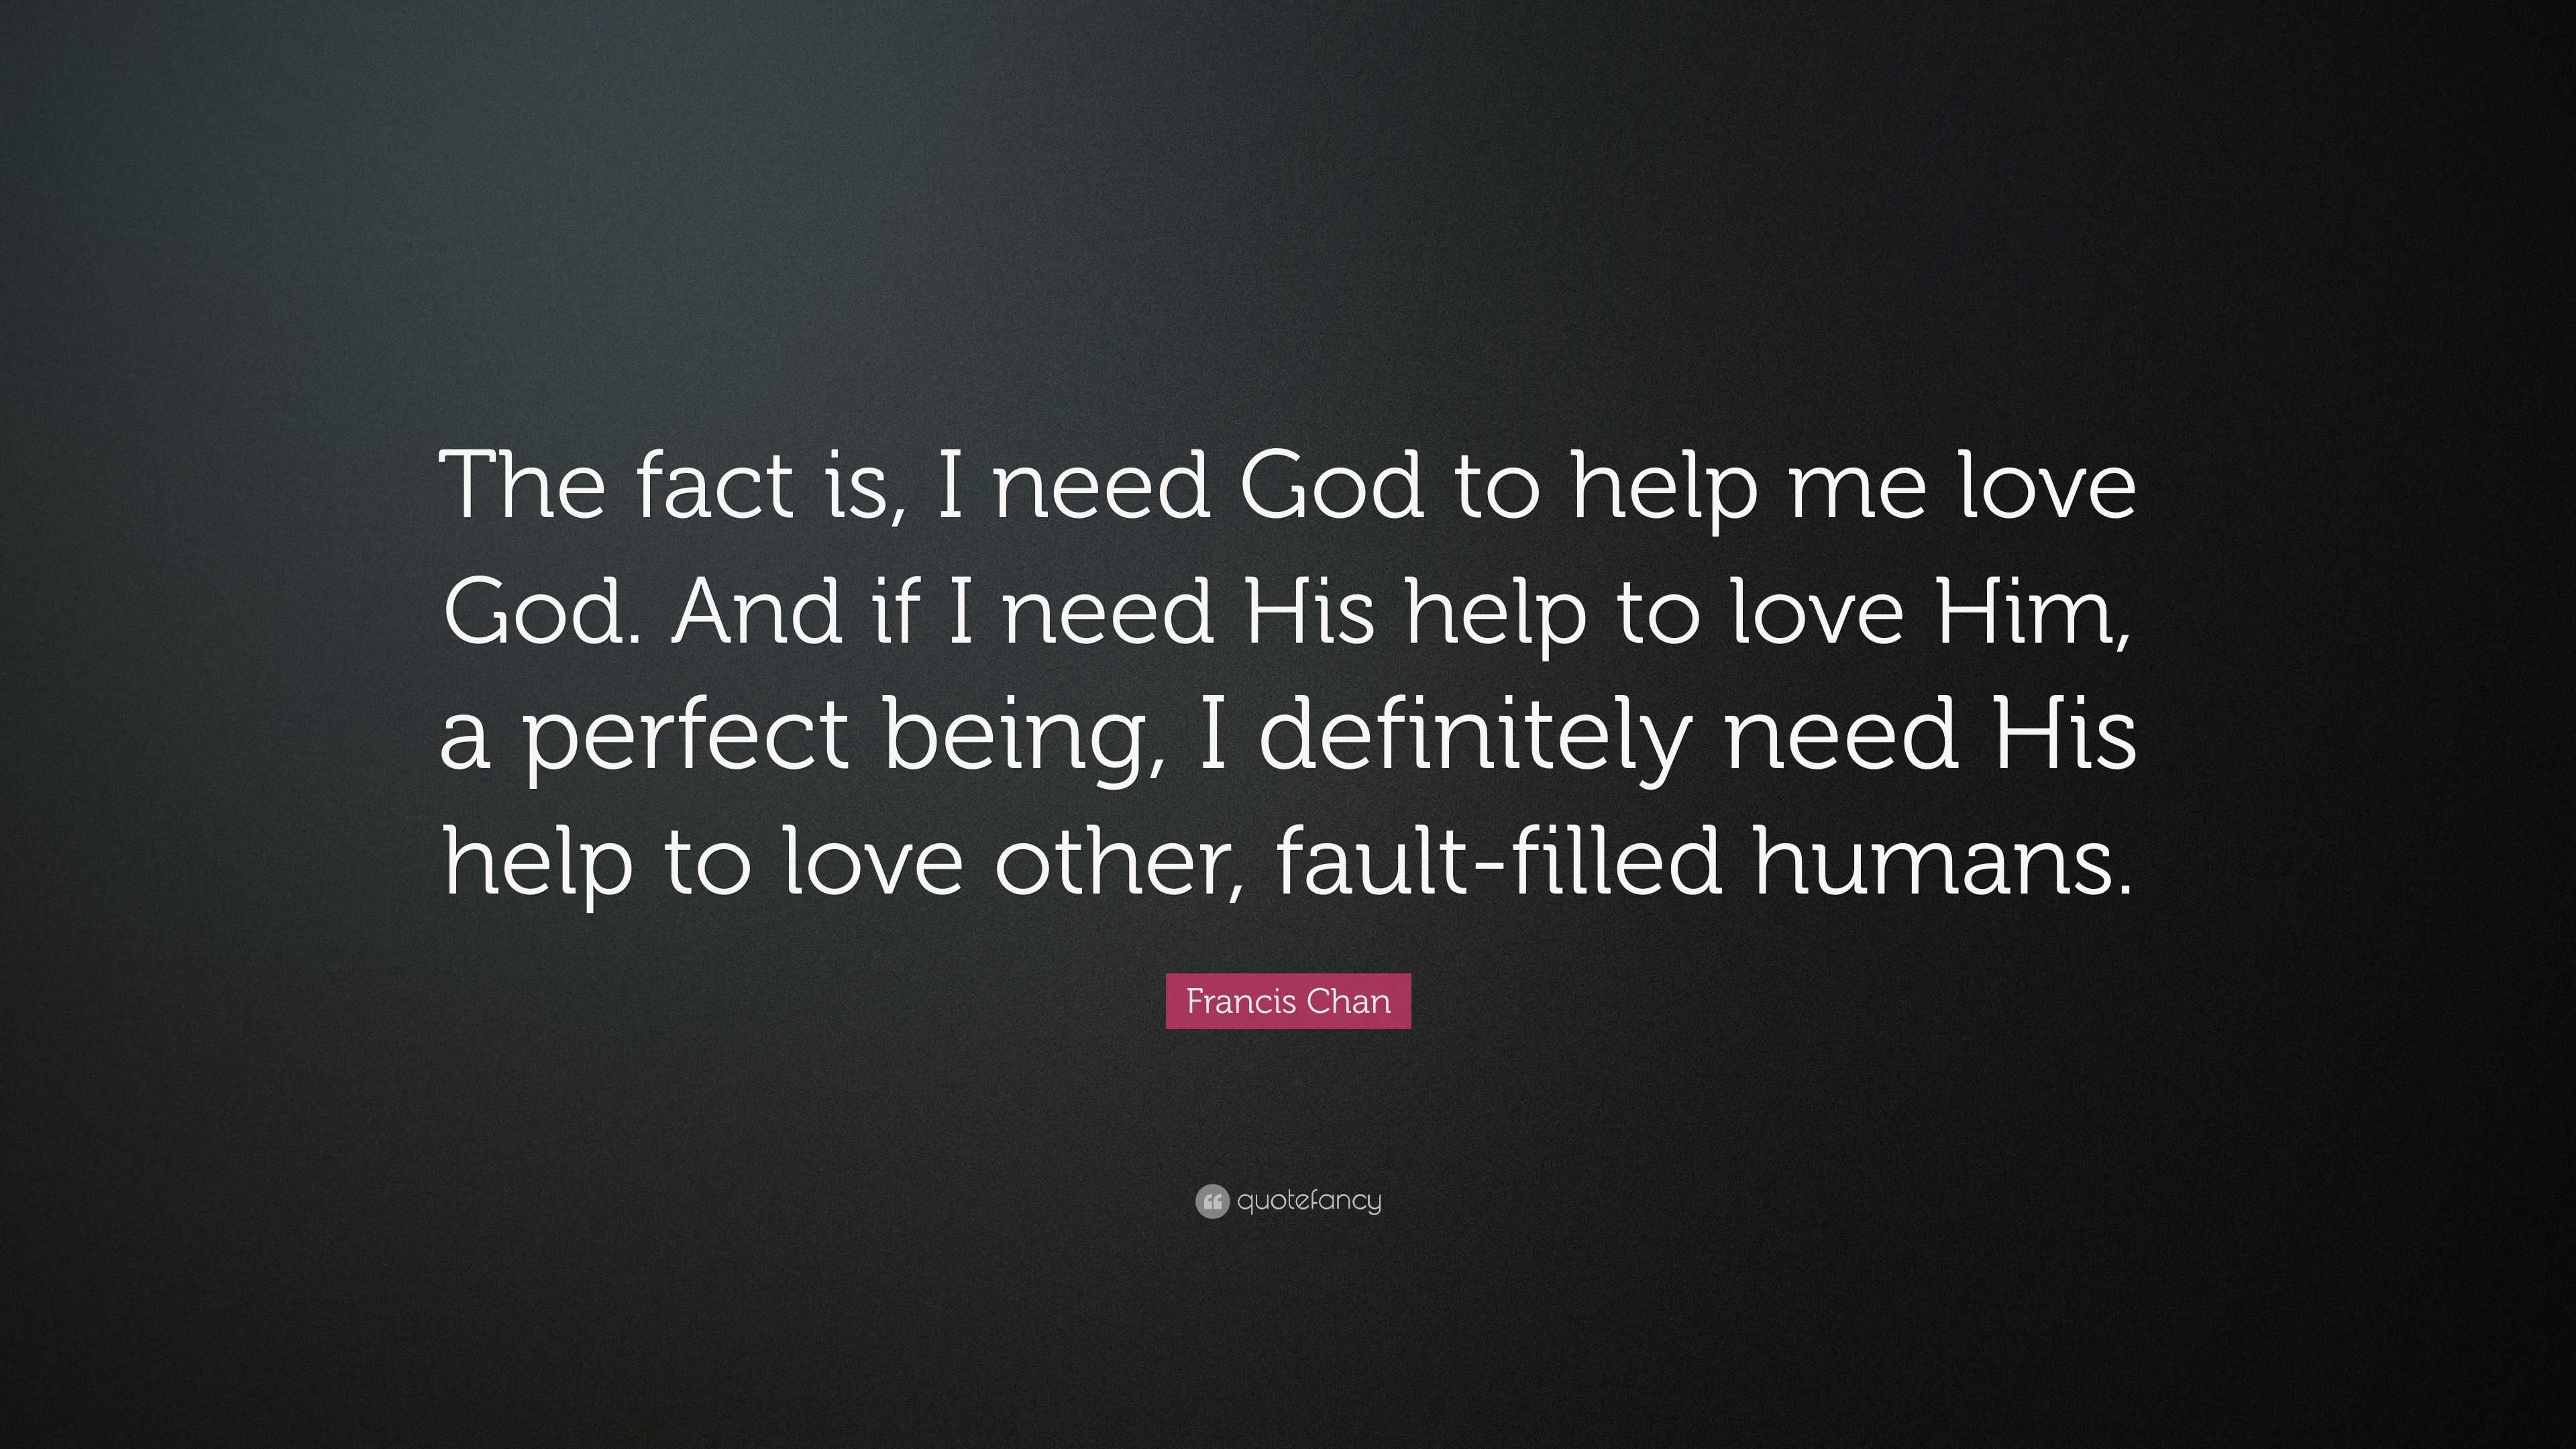 Francis Chan Quote “The fact is I need God to help me love